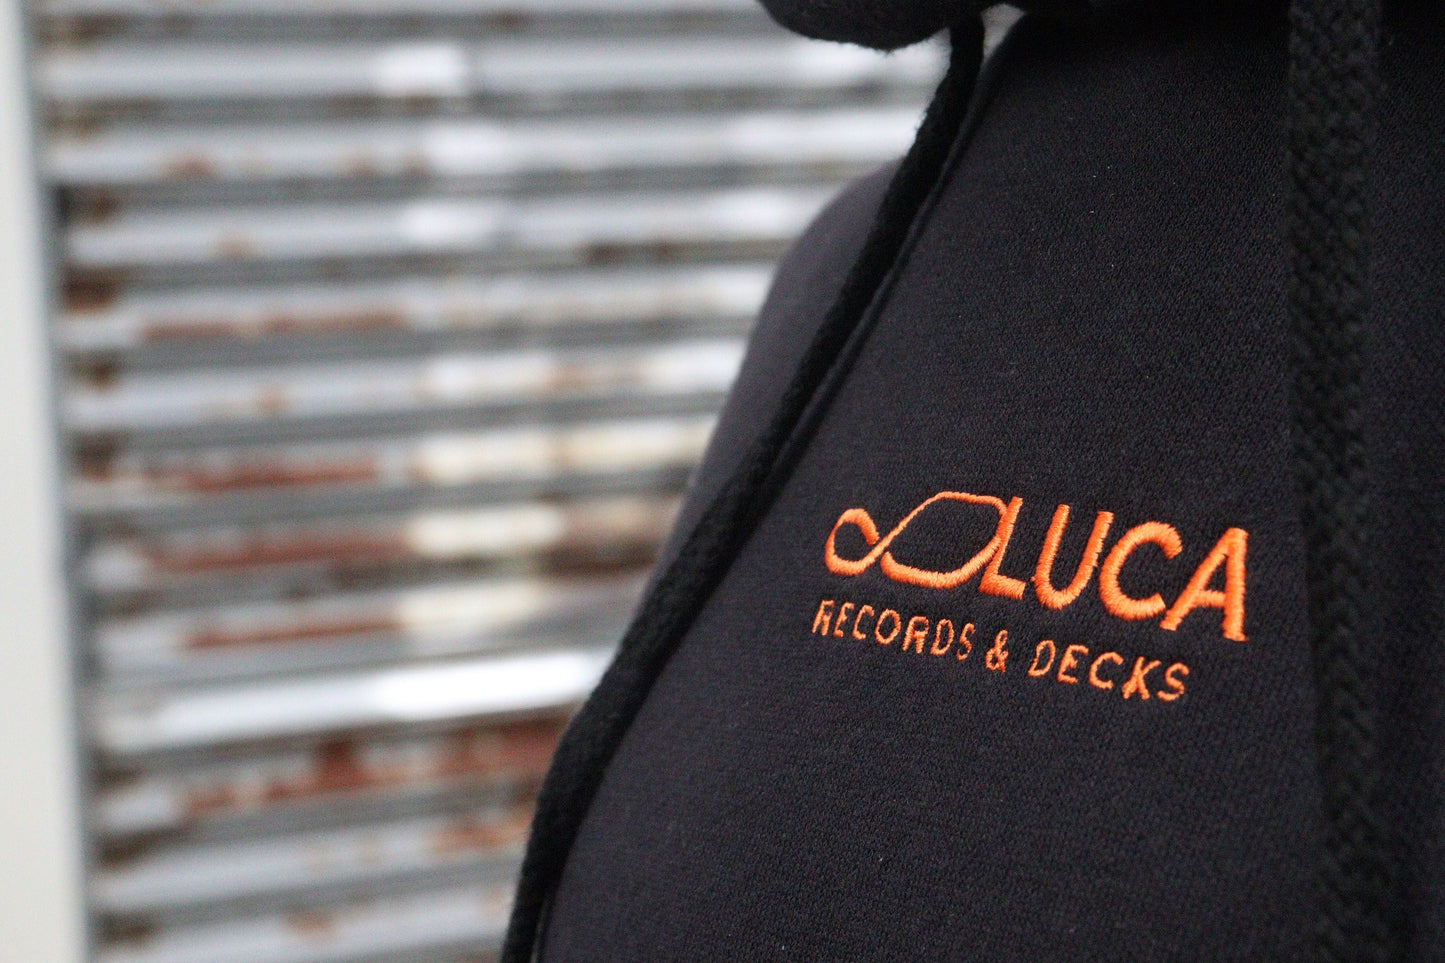 Luca Records & Decks Hoody Black (Embroidered)